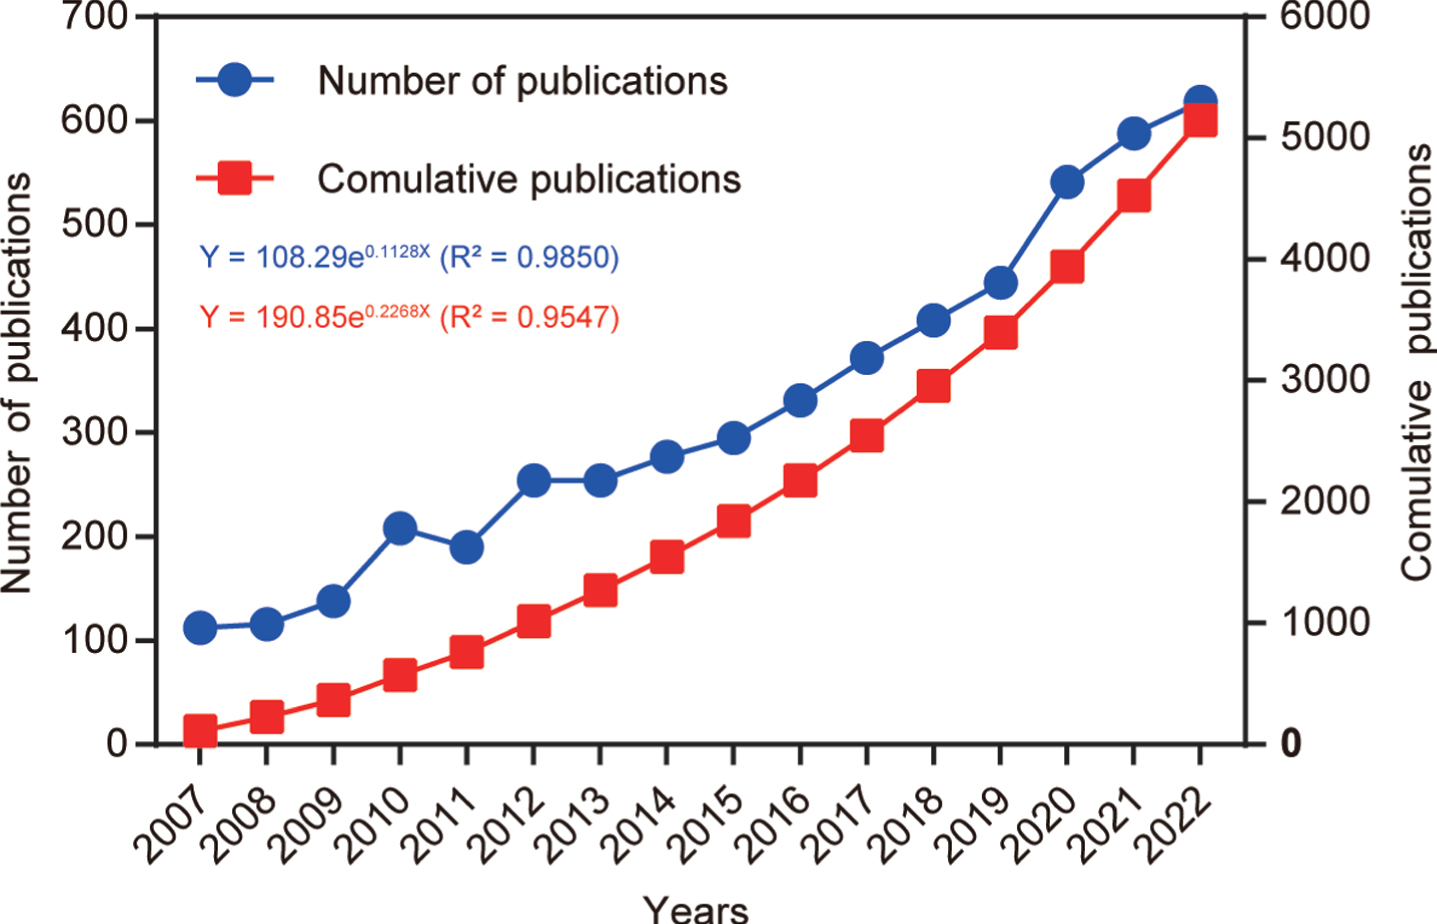 Number of annual publications from 2007 to 2022. The line chart displays the annual number of publications (red square point) and the cumulative number of publications (blue round point) from 2007 to 2022. The X-axis represents the year, and the Y-axis represents the annual number of publications.